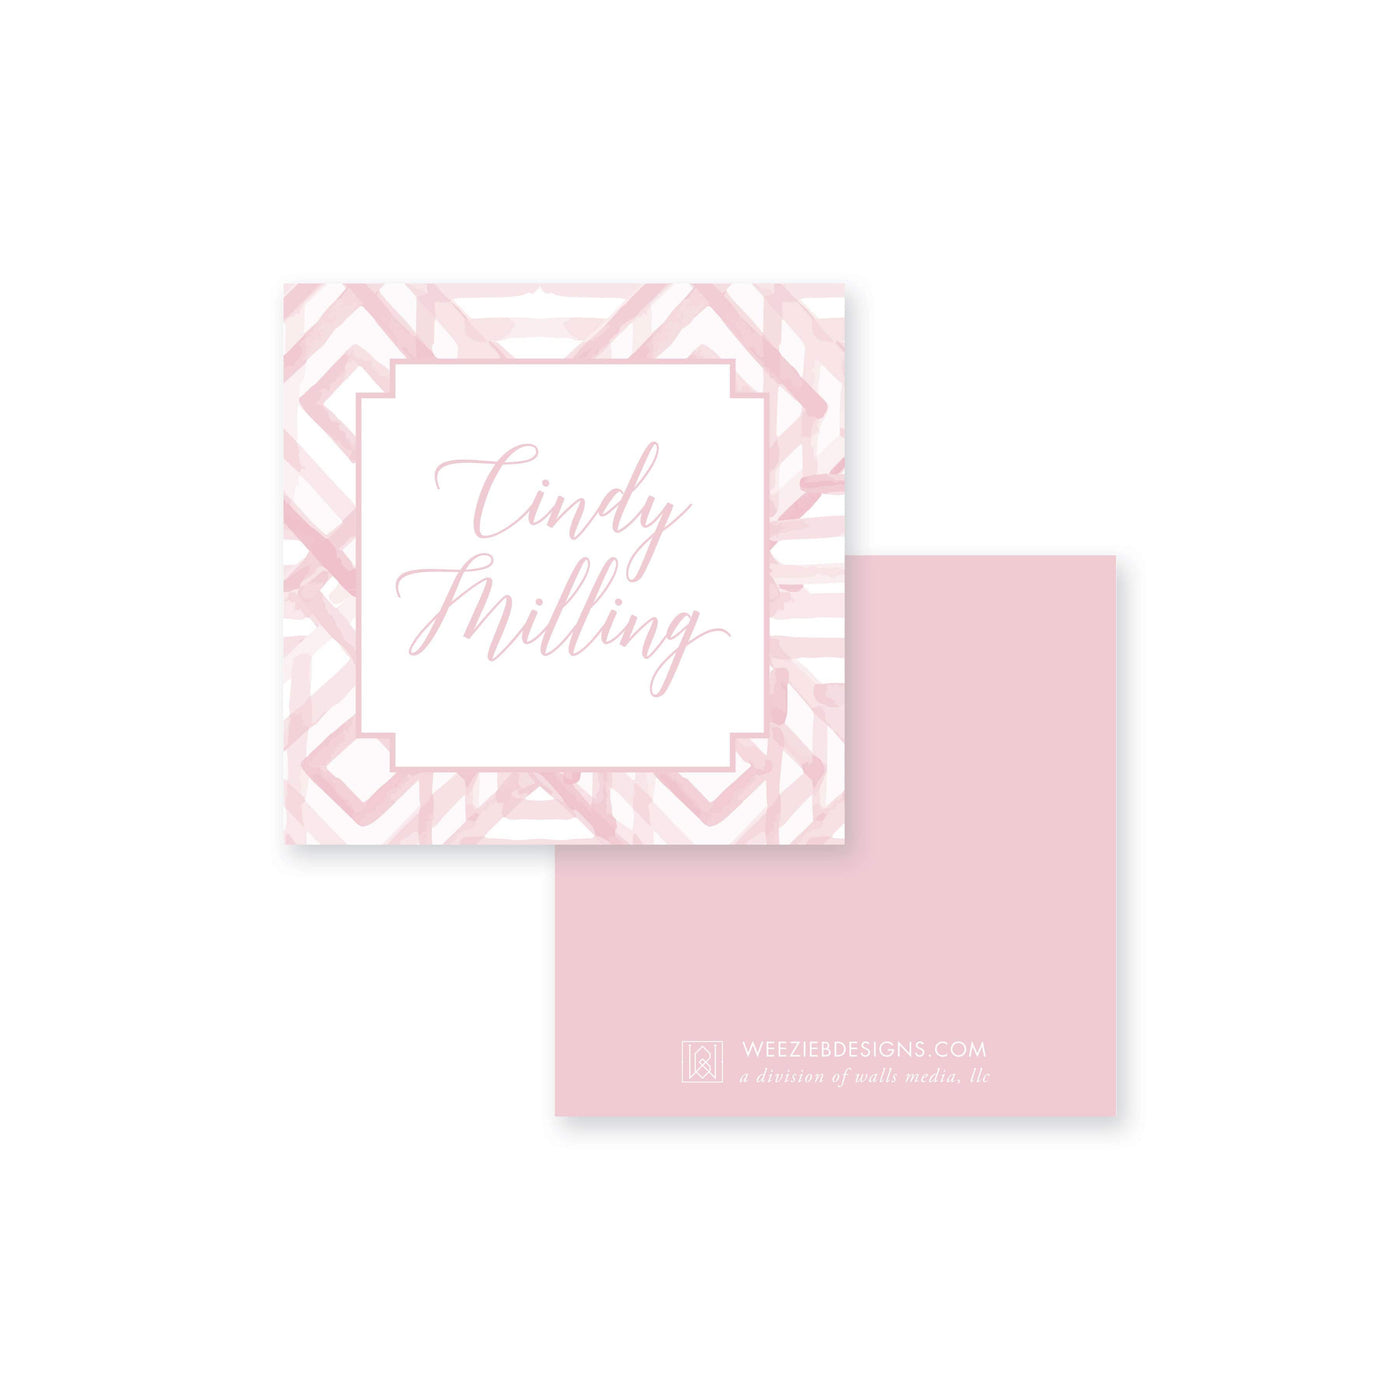 Weezie B. Designs | Watercolor Bamboo Calling Card